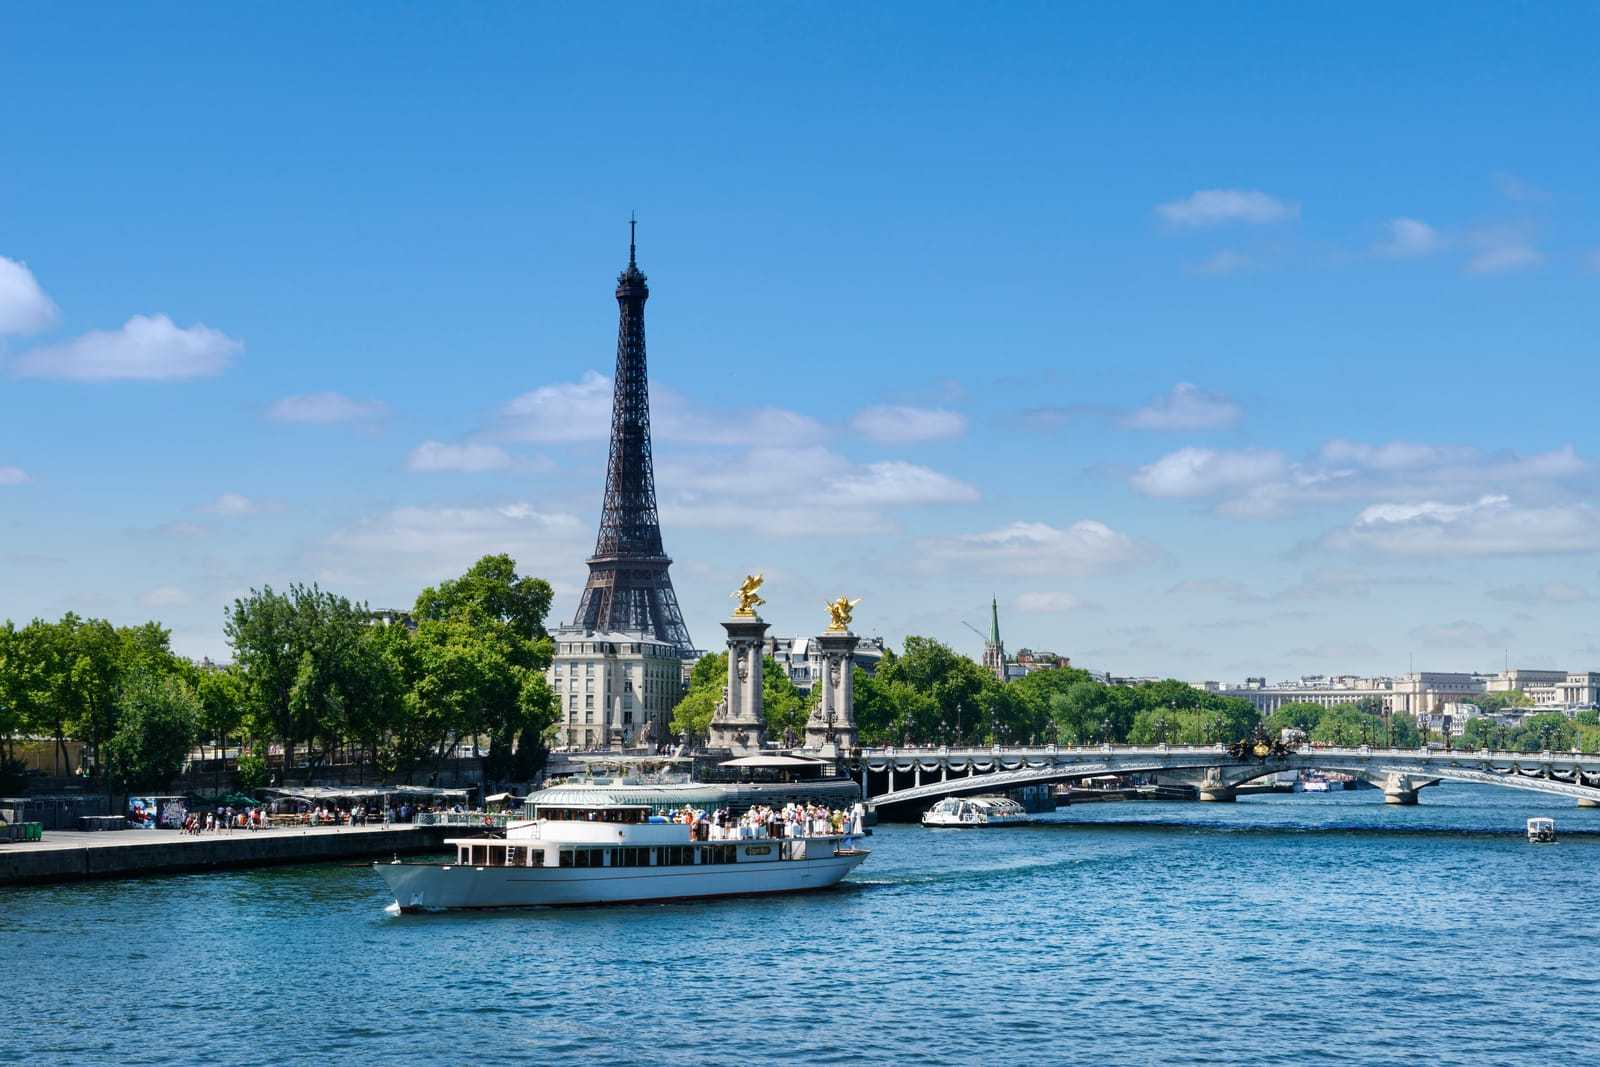 How much is the Seine River dinner cruise in Paris